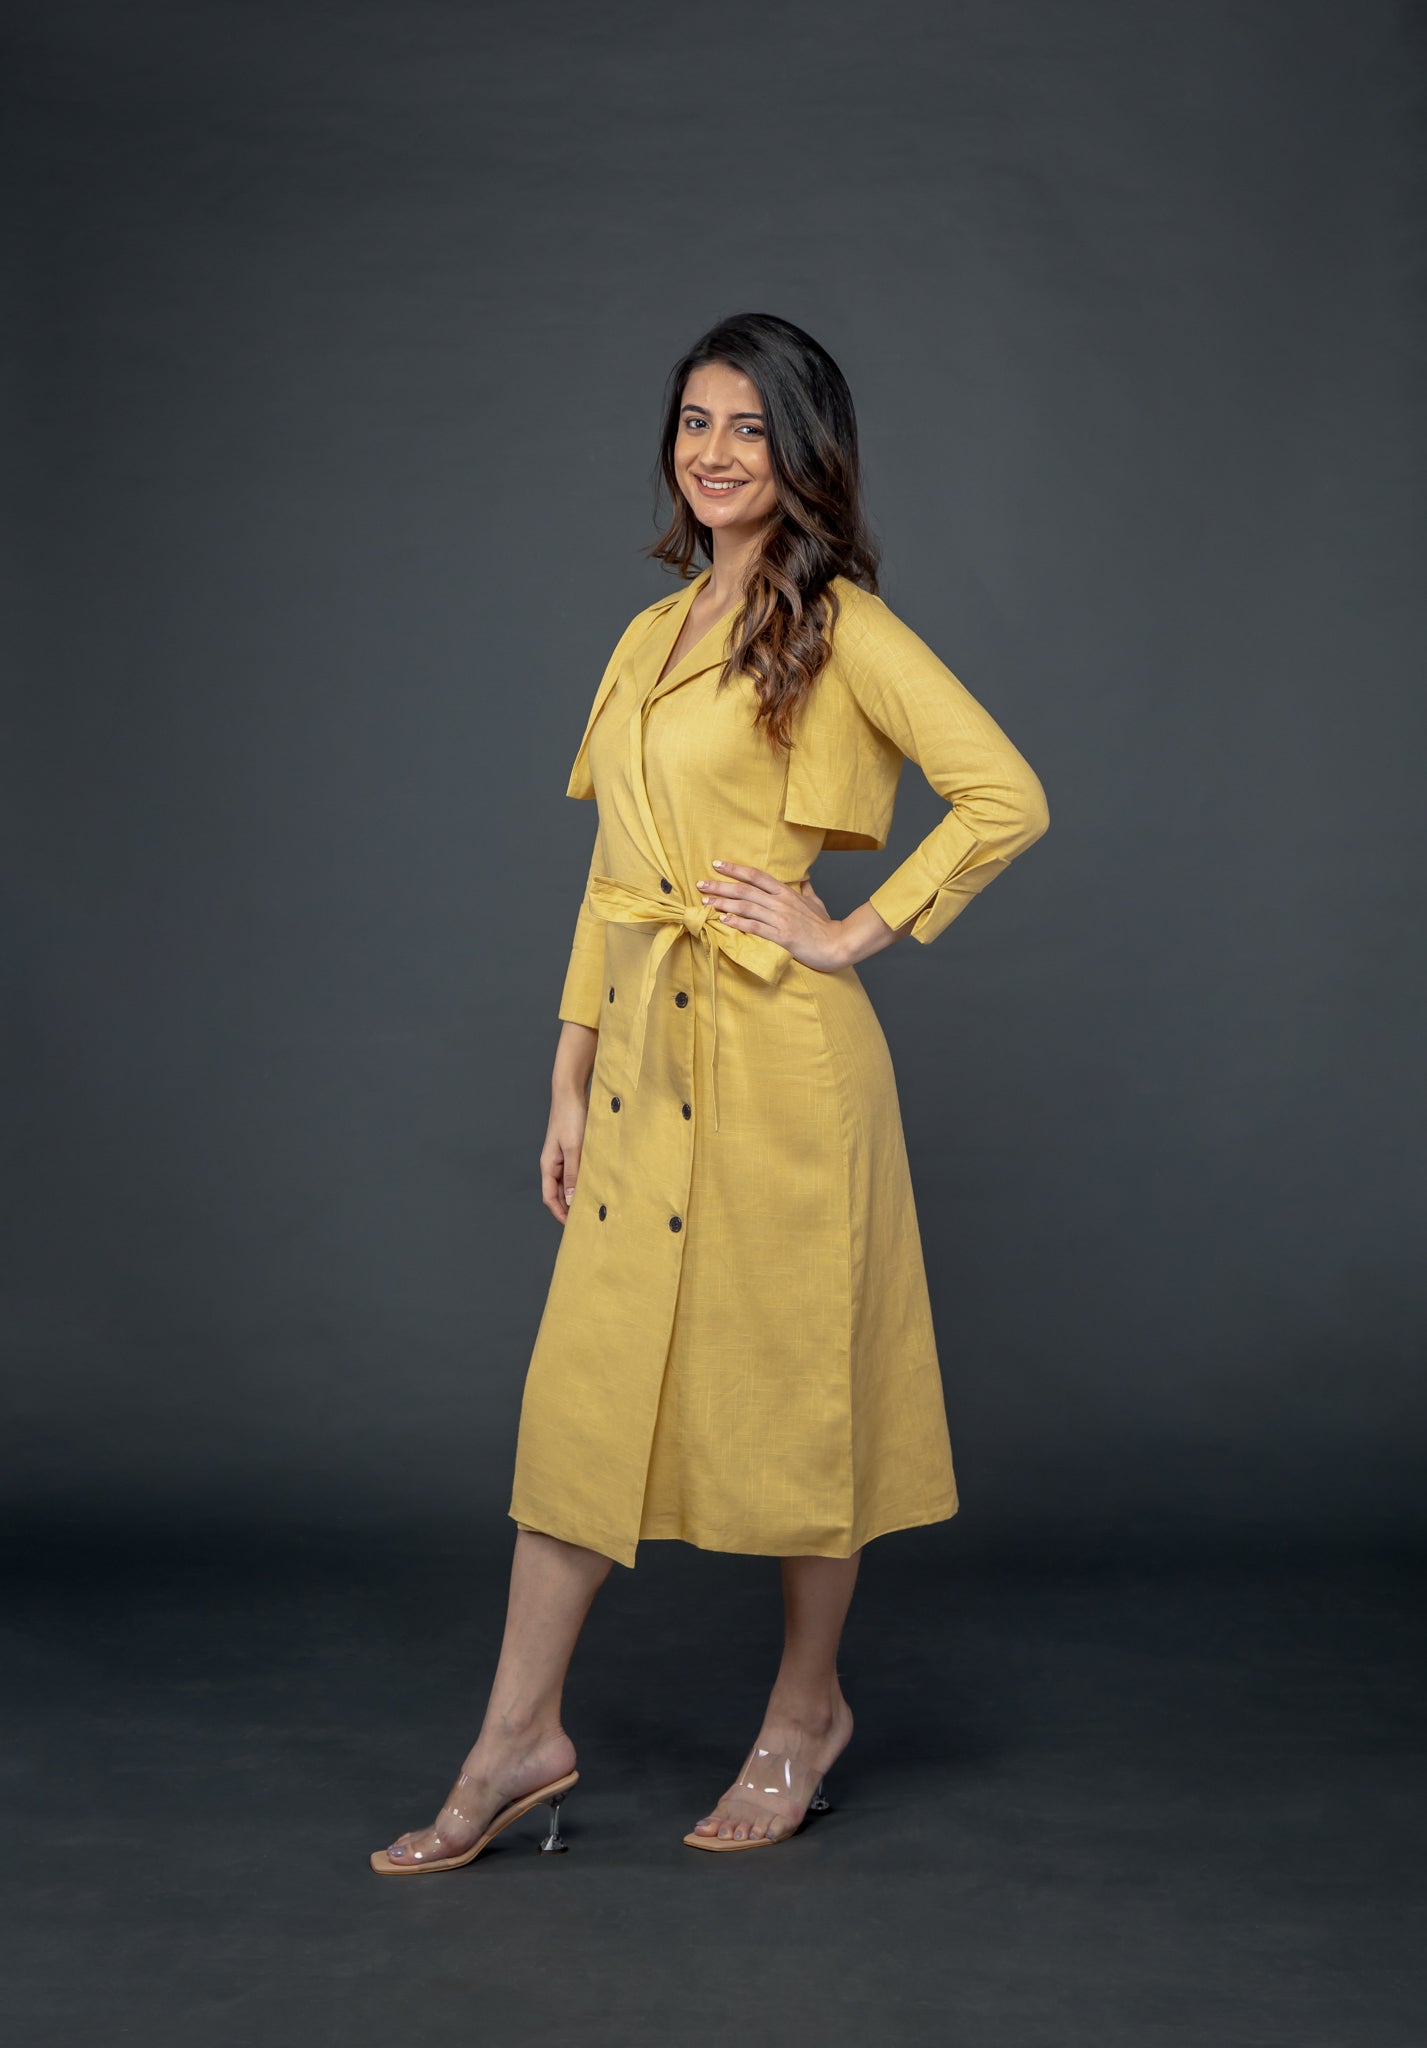 LEMON YELLOW LONG MIDI WITH ATTACHED JACKET